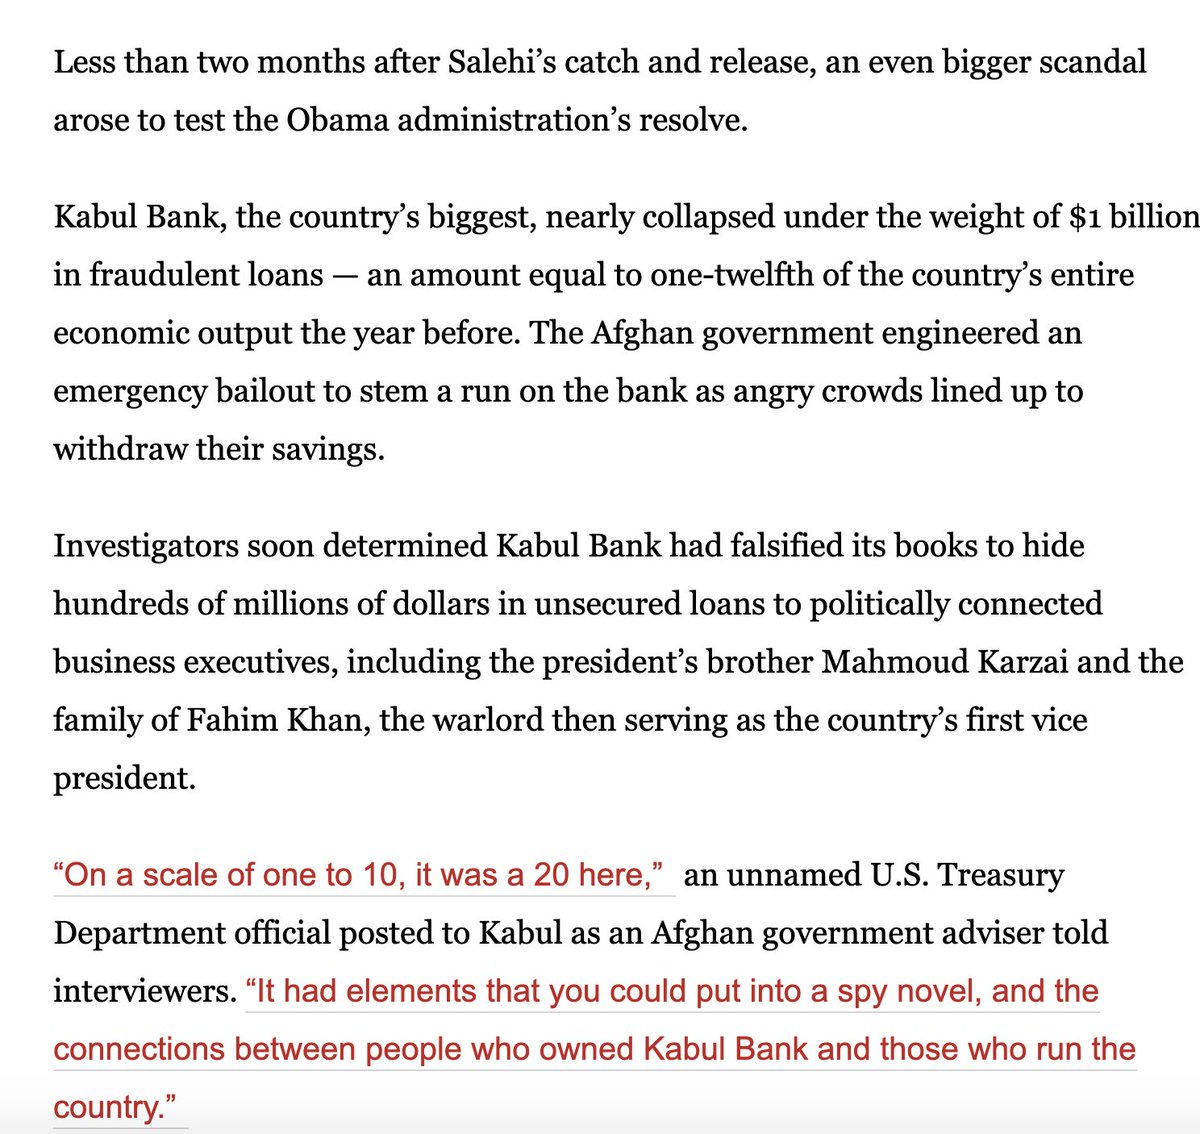 Members of Afghan government stole $1 billion from Kabul Bank, equivalent of 1/12th of GDP the year before. 35/n